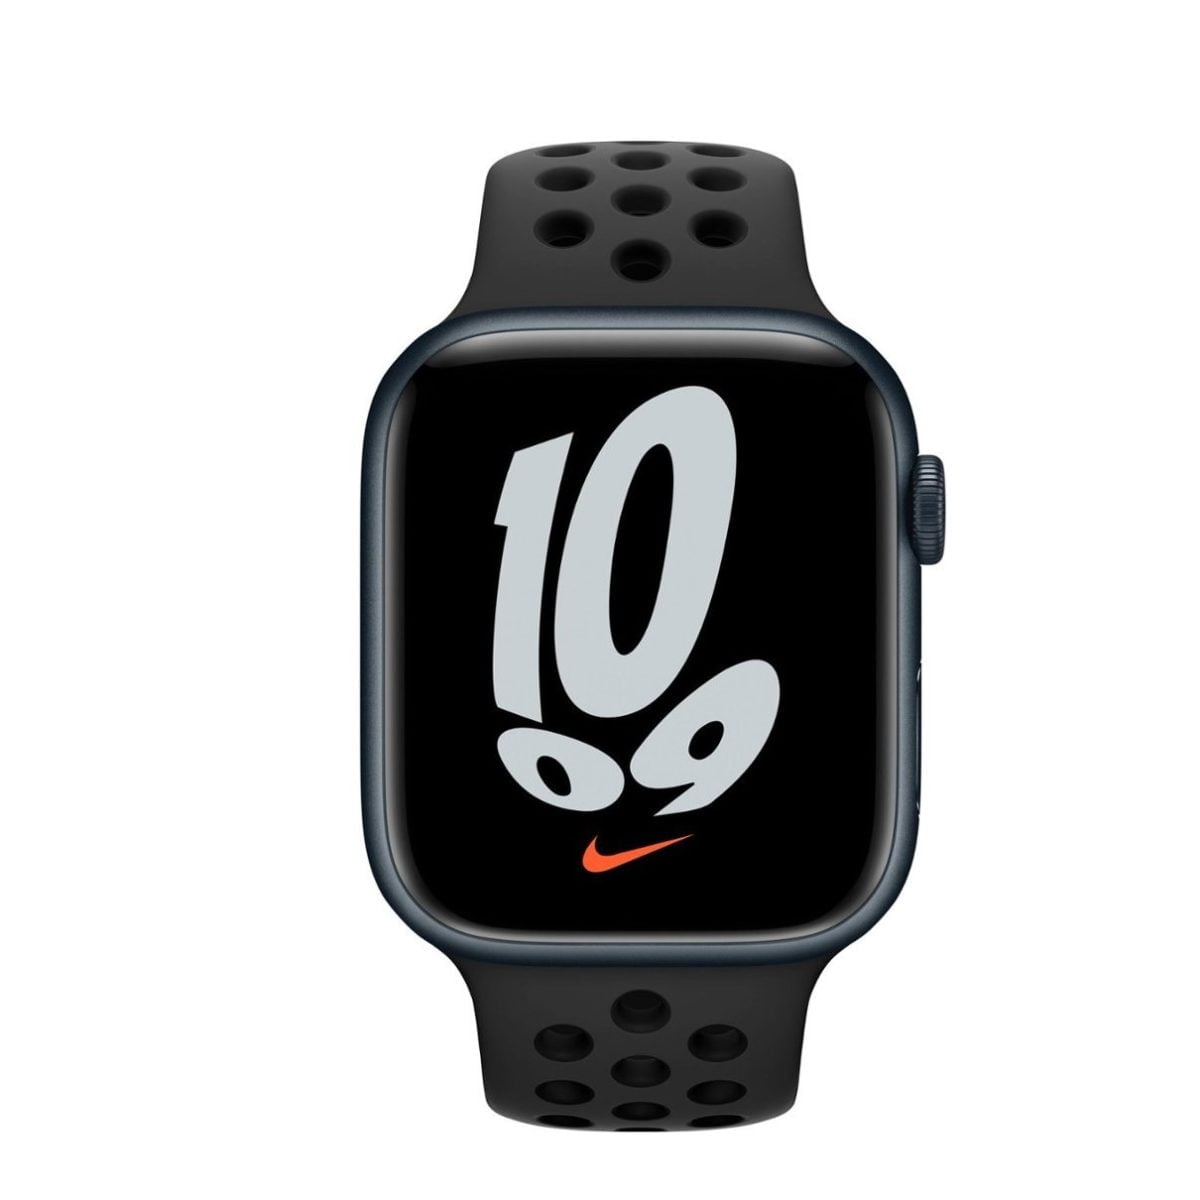 5706677Cv11D Apple &Lt;H1&Gt;Apple Watch Nike Series 7 (Gps) 41Mm Nike Sport Band - Midnight&Lt;/H1&Gt; &Lt;H2&Gt;Model: Mkn43&Lt;/H2&Gt; Https://Www.youtube.com/Watch?V=Mmdq-Gwbnze &Lt;Div Class=&Quot;Long-Description-Container Body-Copy &Quot;&Gt; &Lt;Div Class=&Quot;Html-Fragment&Quot;&Gt; &Lt;Div&Gt; &Lt;Div&Gt;The Largest, Most Advanced Always-On Retina Display Yet Makes Everything You Do With Your Apple Watch Series 7 Bigger And Better. Series 7 Is The Most Durable Apple Watch Ever Built, With An, Even More, Crack-Resistant Front Crystal. Advanced Features Let You Measure Your Blood Oxygen Level,¹ Take An Ecg Anytime,² And Access Mindfulness And Sleep Tracking Apps. You Can Also Track Dozens Of Workouts, Including New Tai Chi And Pilates.&Lt;/Div&Gt; &Lt;/Div&Gt; &Lt;/Div&Gt; &Lt;/Div&Gt; Apple Watch Nike Series Apple Watch Nike Series 7 (Gps) 41Mm - Midnight